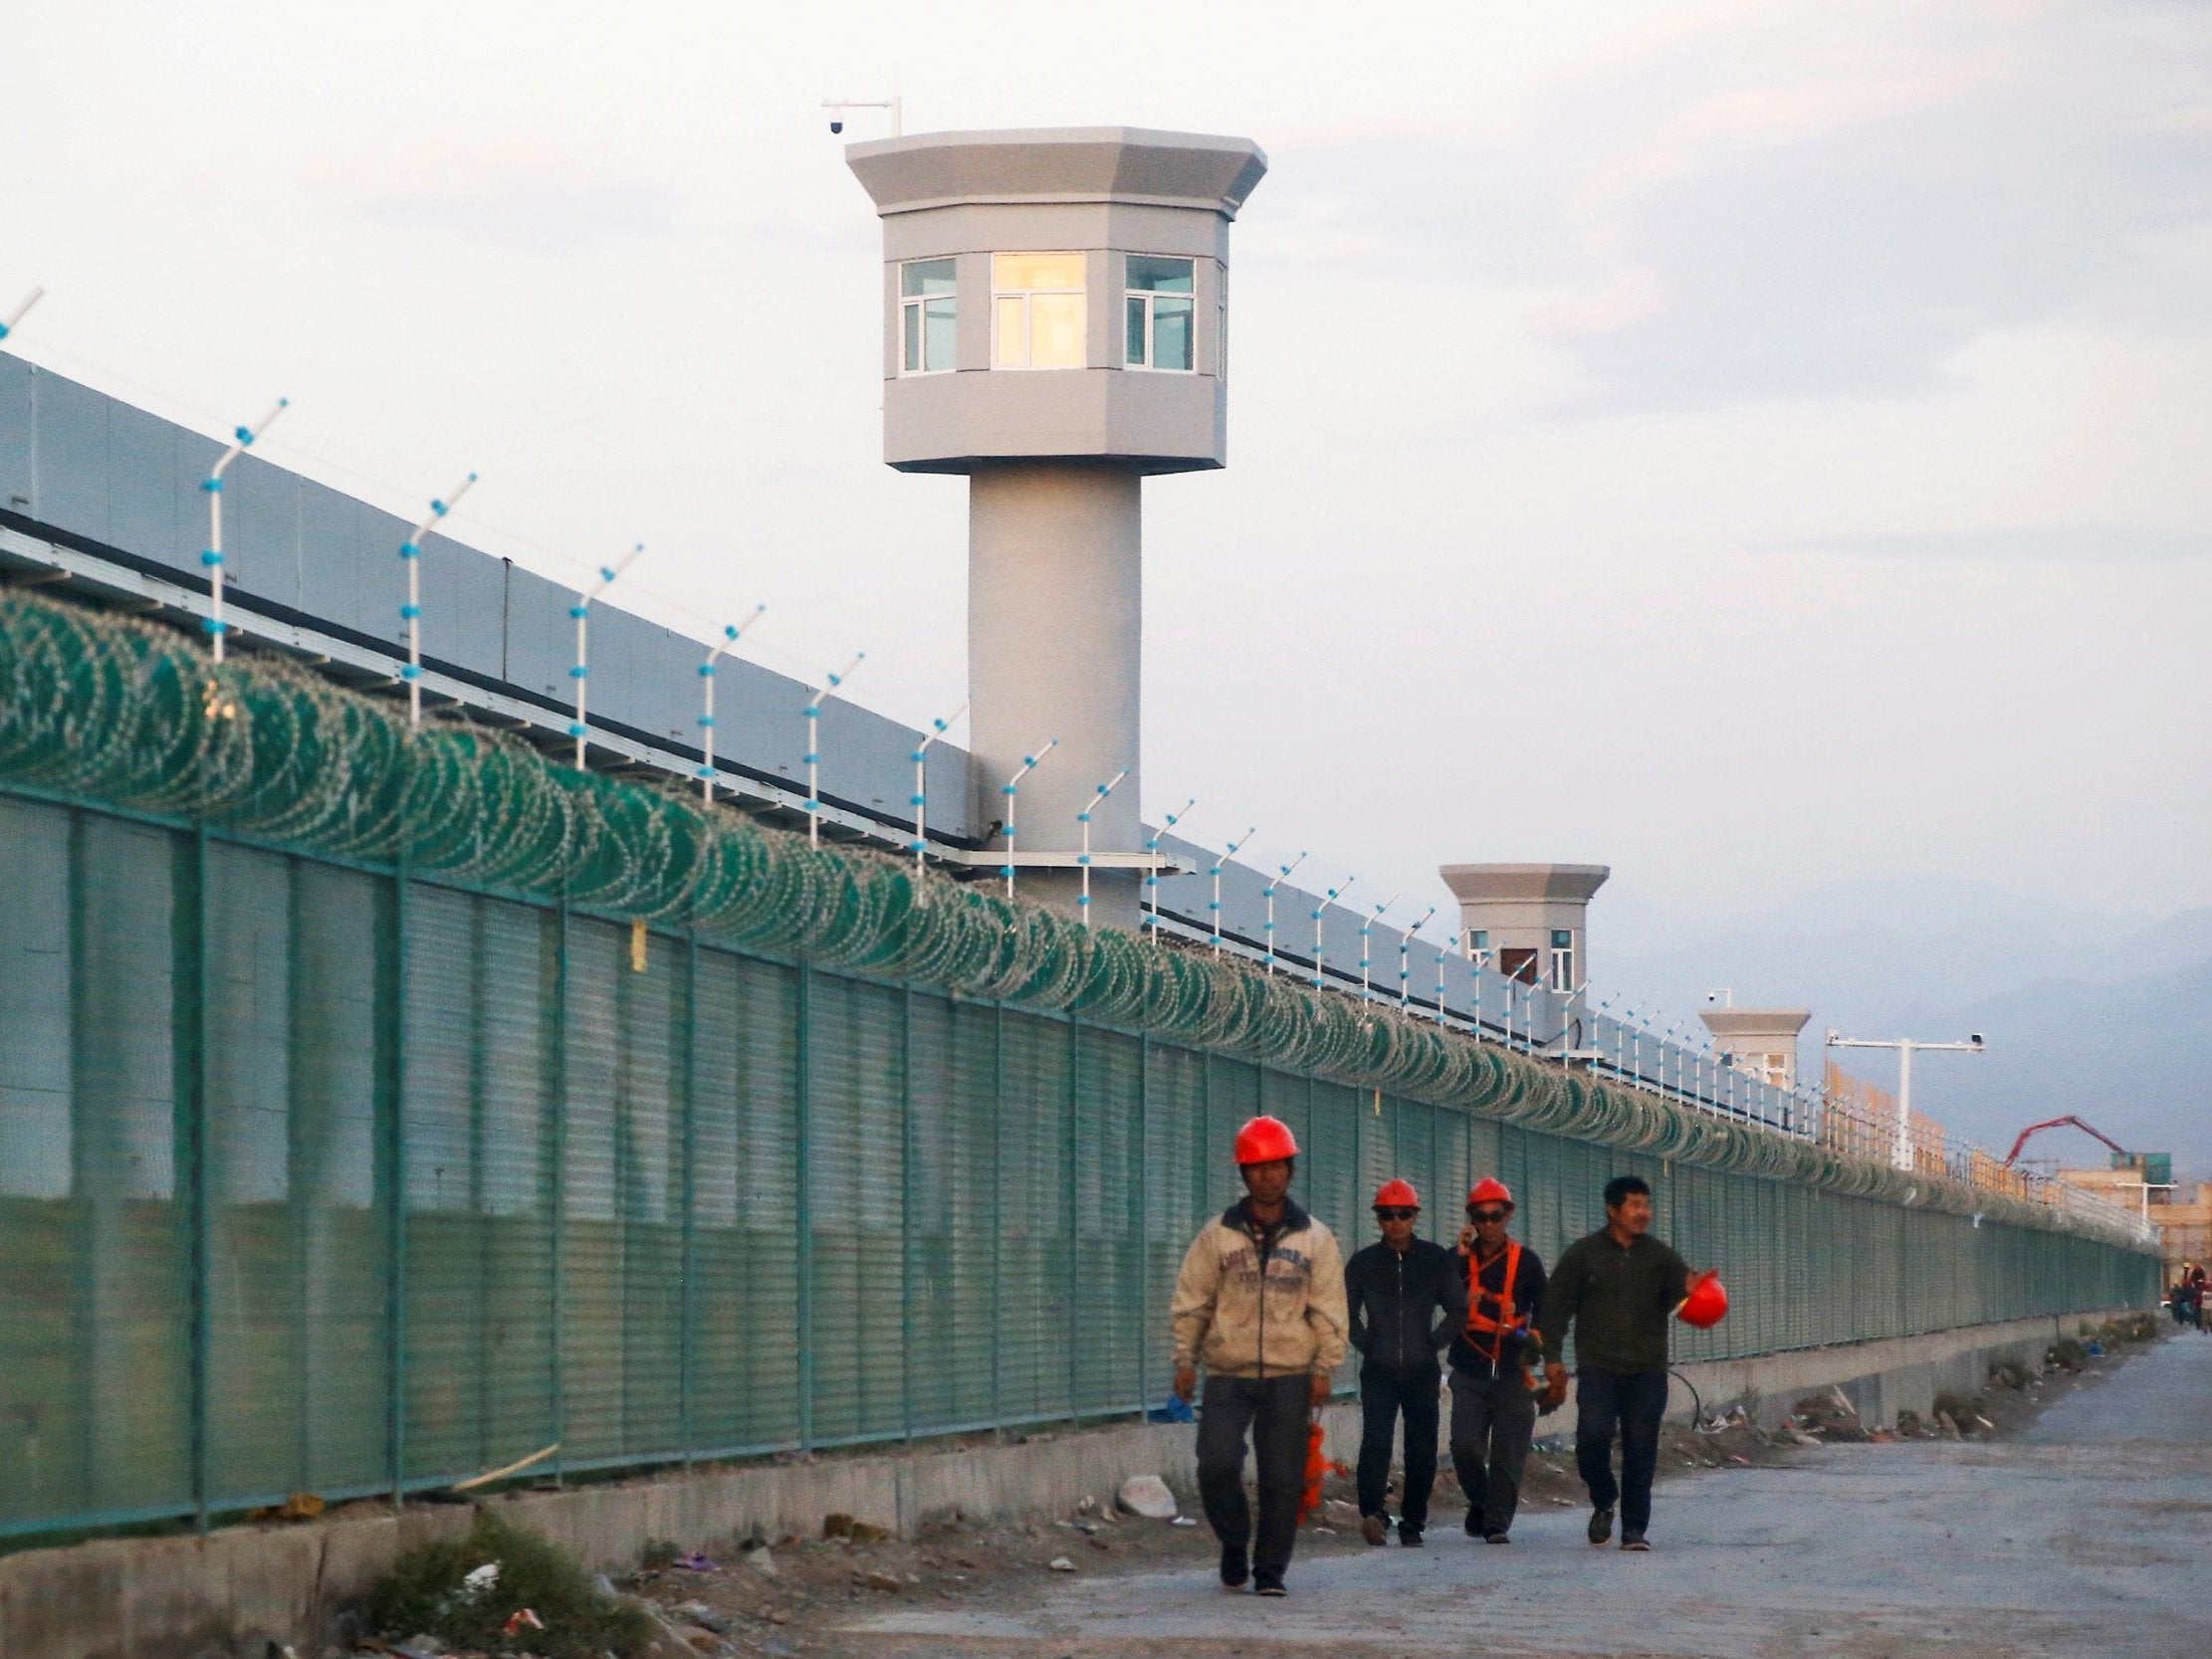 Workers walk beside the fence of an internment camp in Xinjiang, China, on 4 September, 2018.